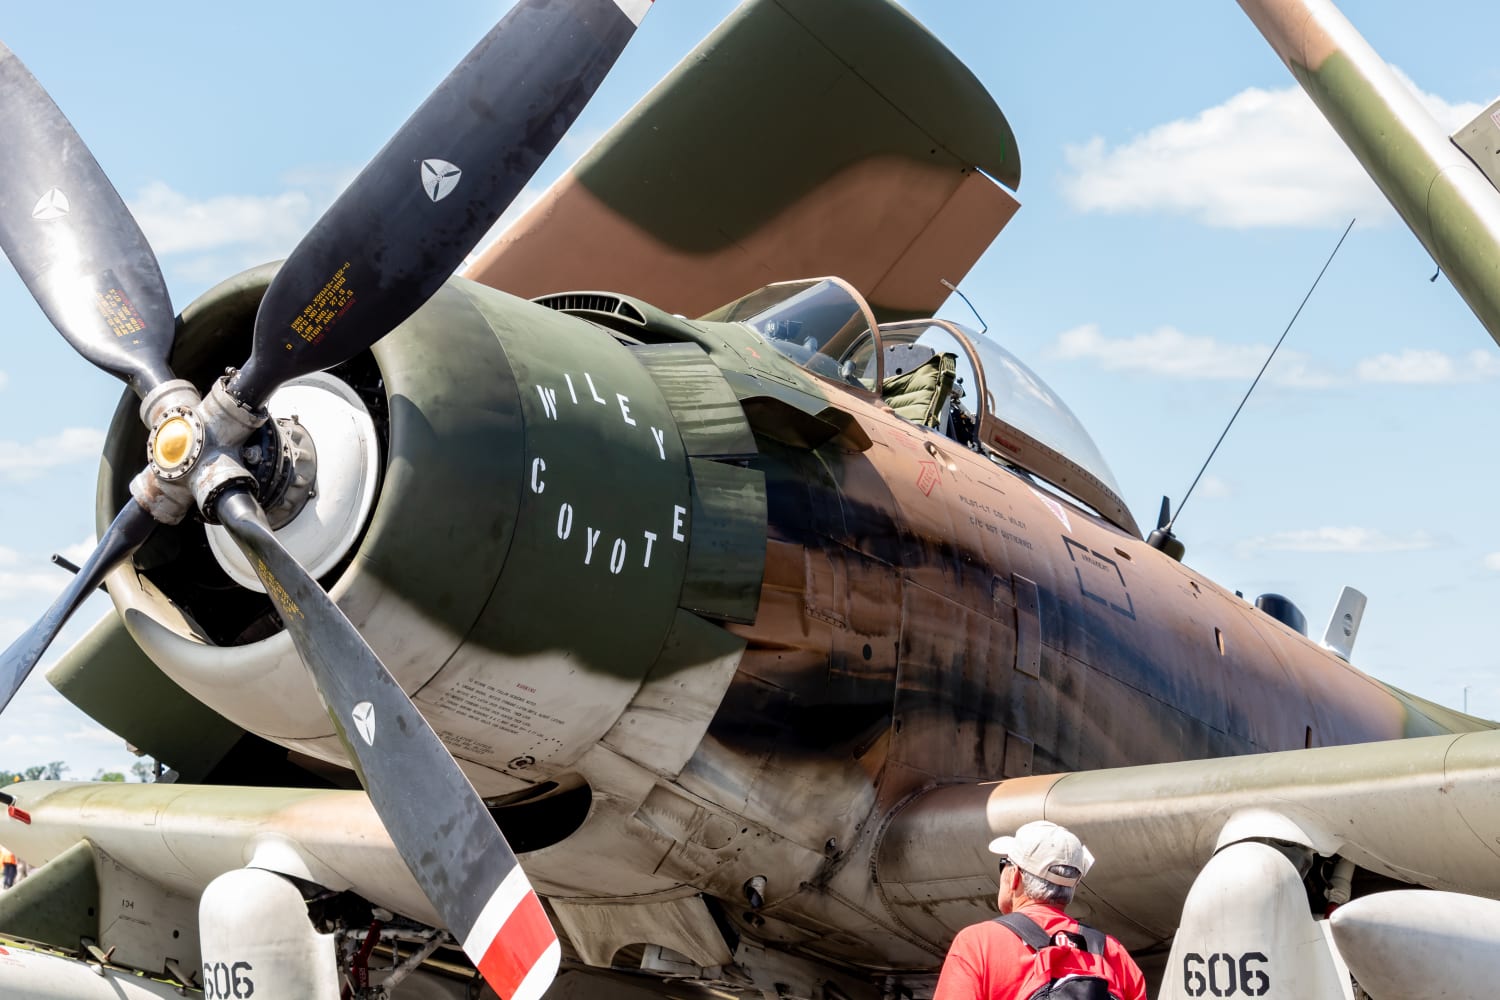 One of my favorites, the A-1 Skyraider